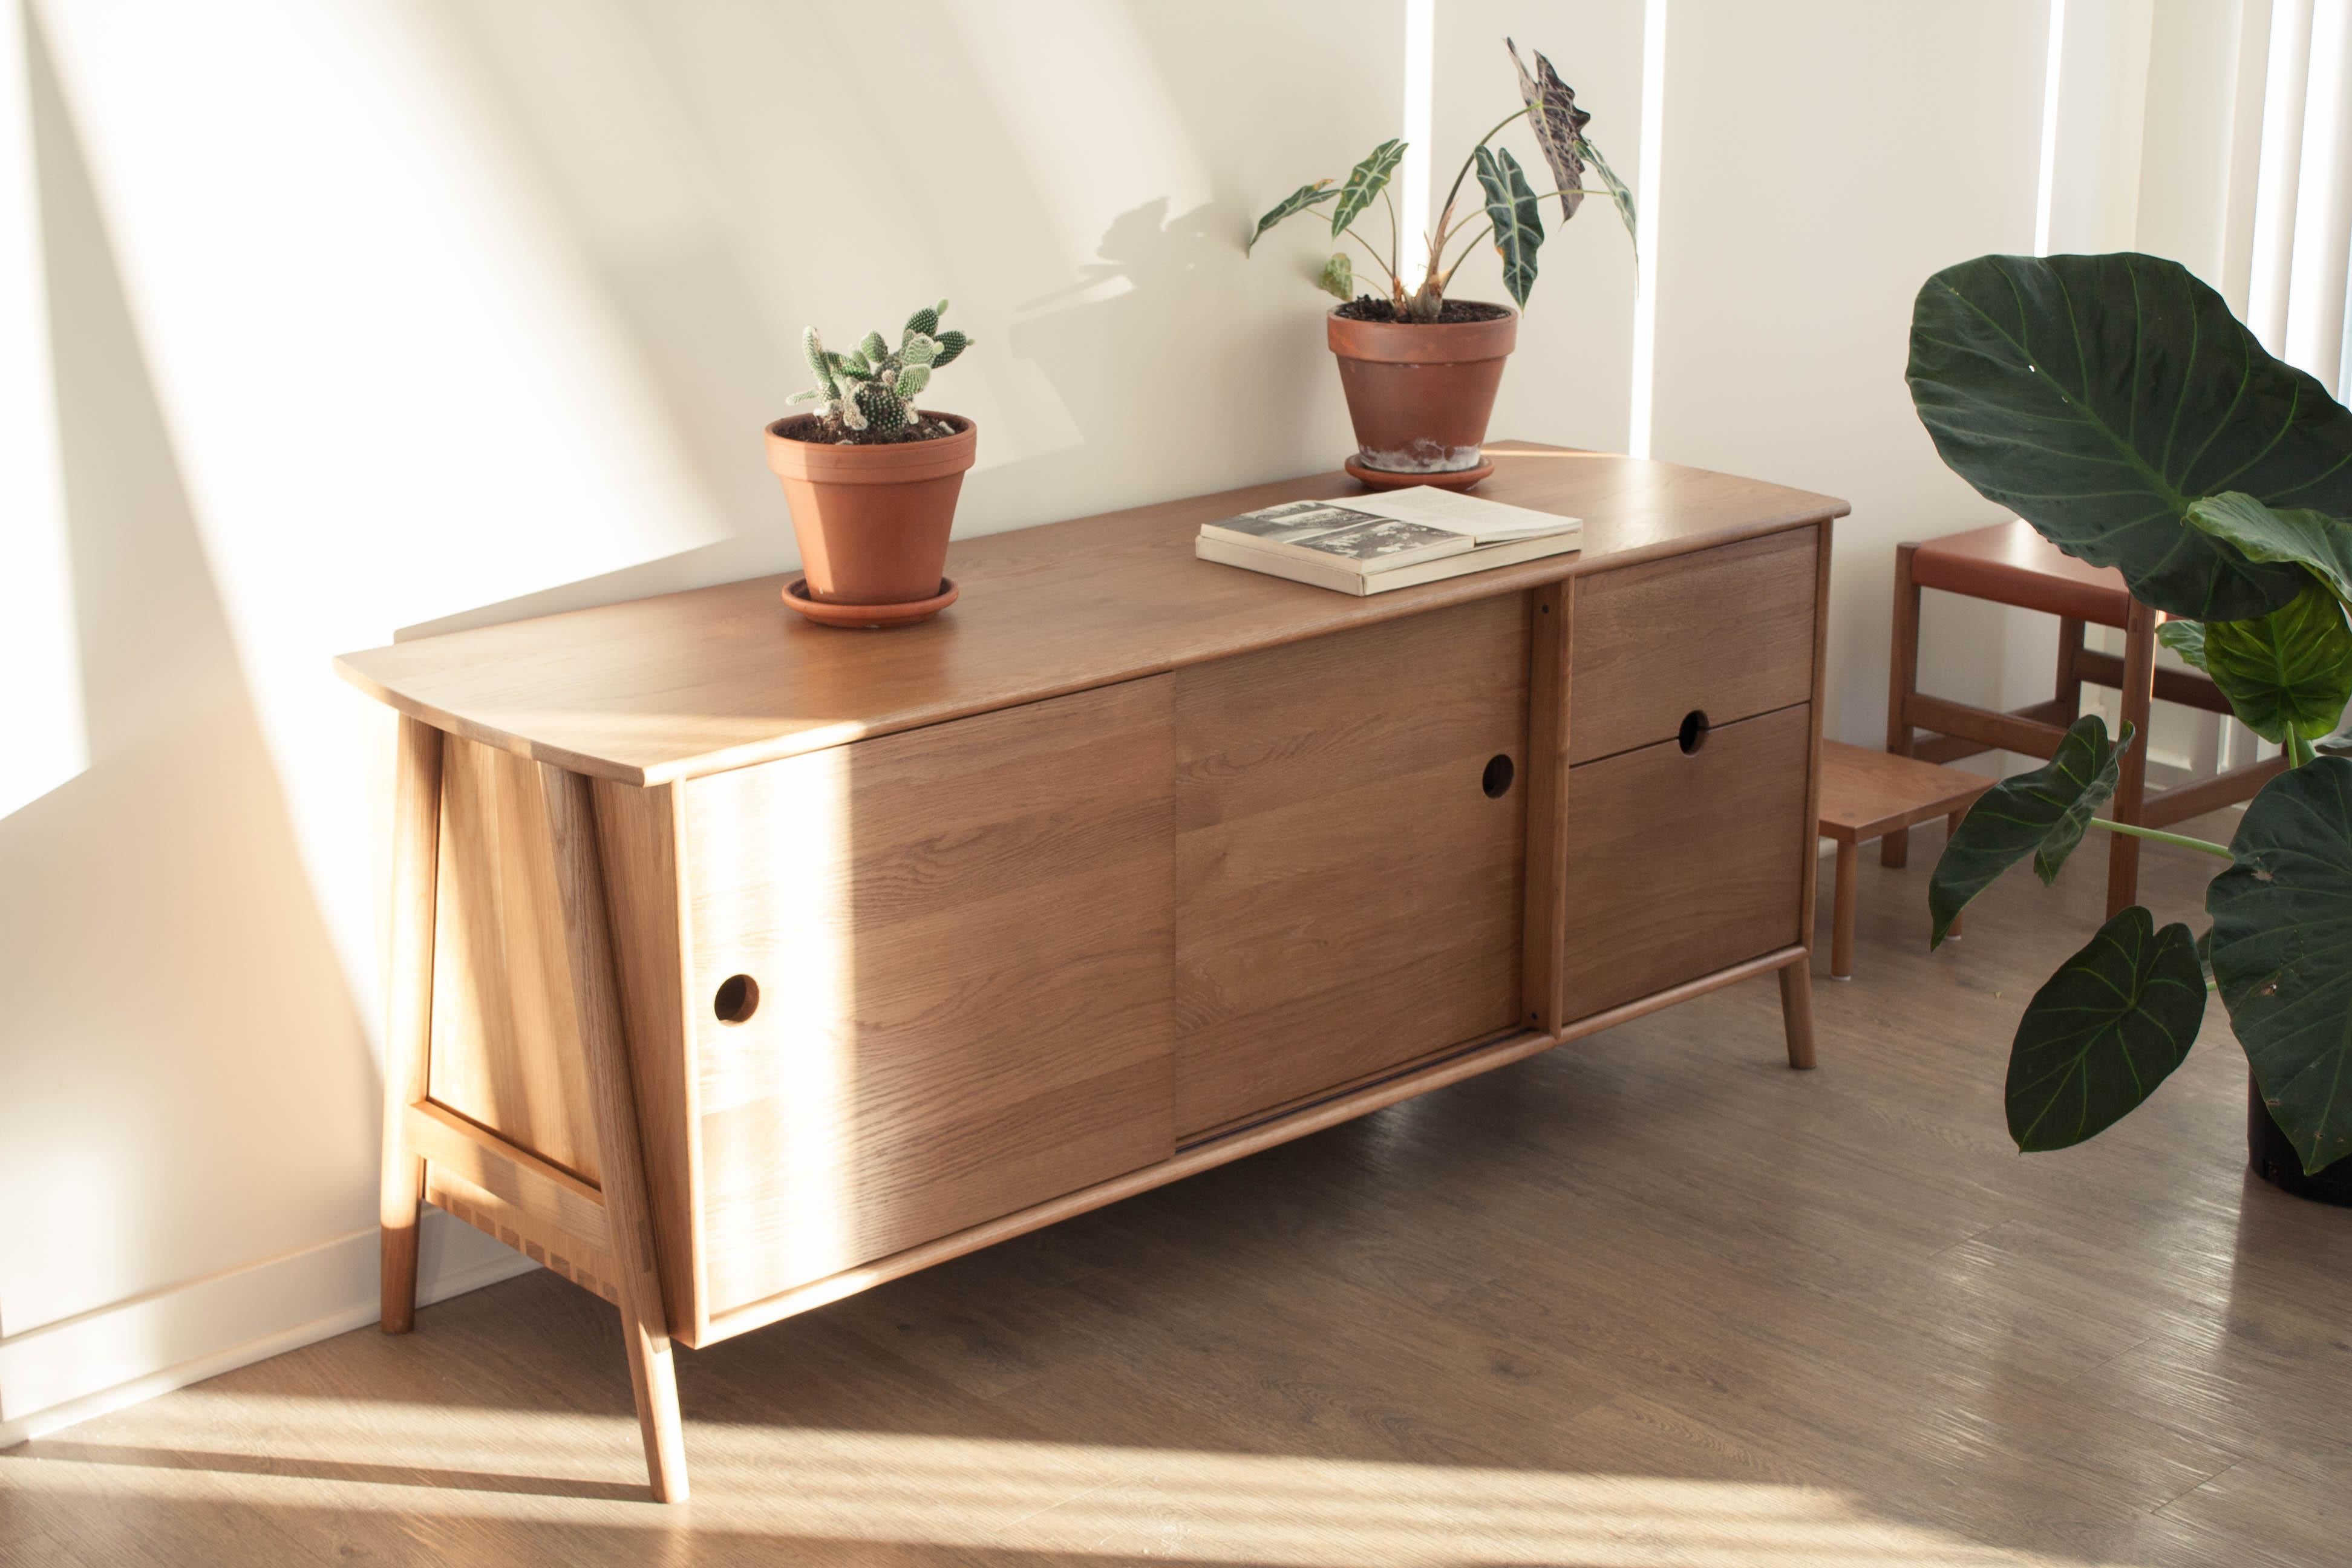 Sun at Six is a contemporary furniture design studio that works with traditional Chinese joinery masters to handcraft our pieces using traditional joinery. The woodbine sideboard features dovetails and traditional joinery throughout.

Great